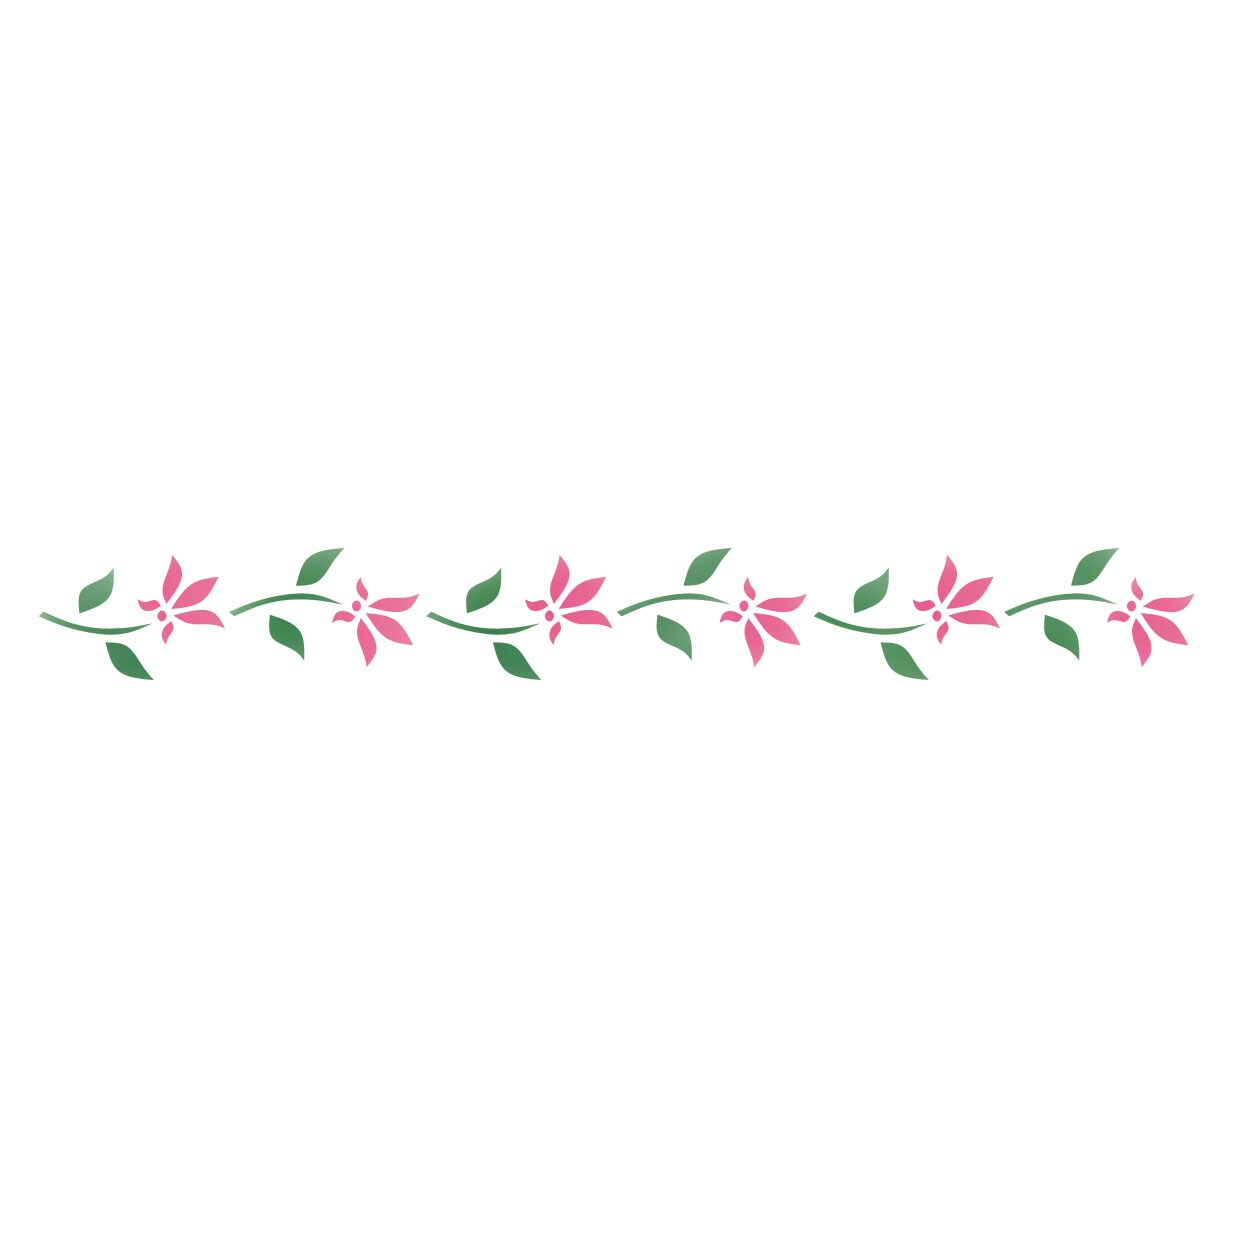 Mini Floral Wall Stencil | 248 by Designer Stencils | Floral Stencils | Reusable Art Craft Stencils for Painting on Walls, Canvas, Wood | Reusable Plastic Paint Stencil for Home Makeover | Easy to Use &#x26; Clean Art Stencil